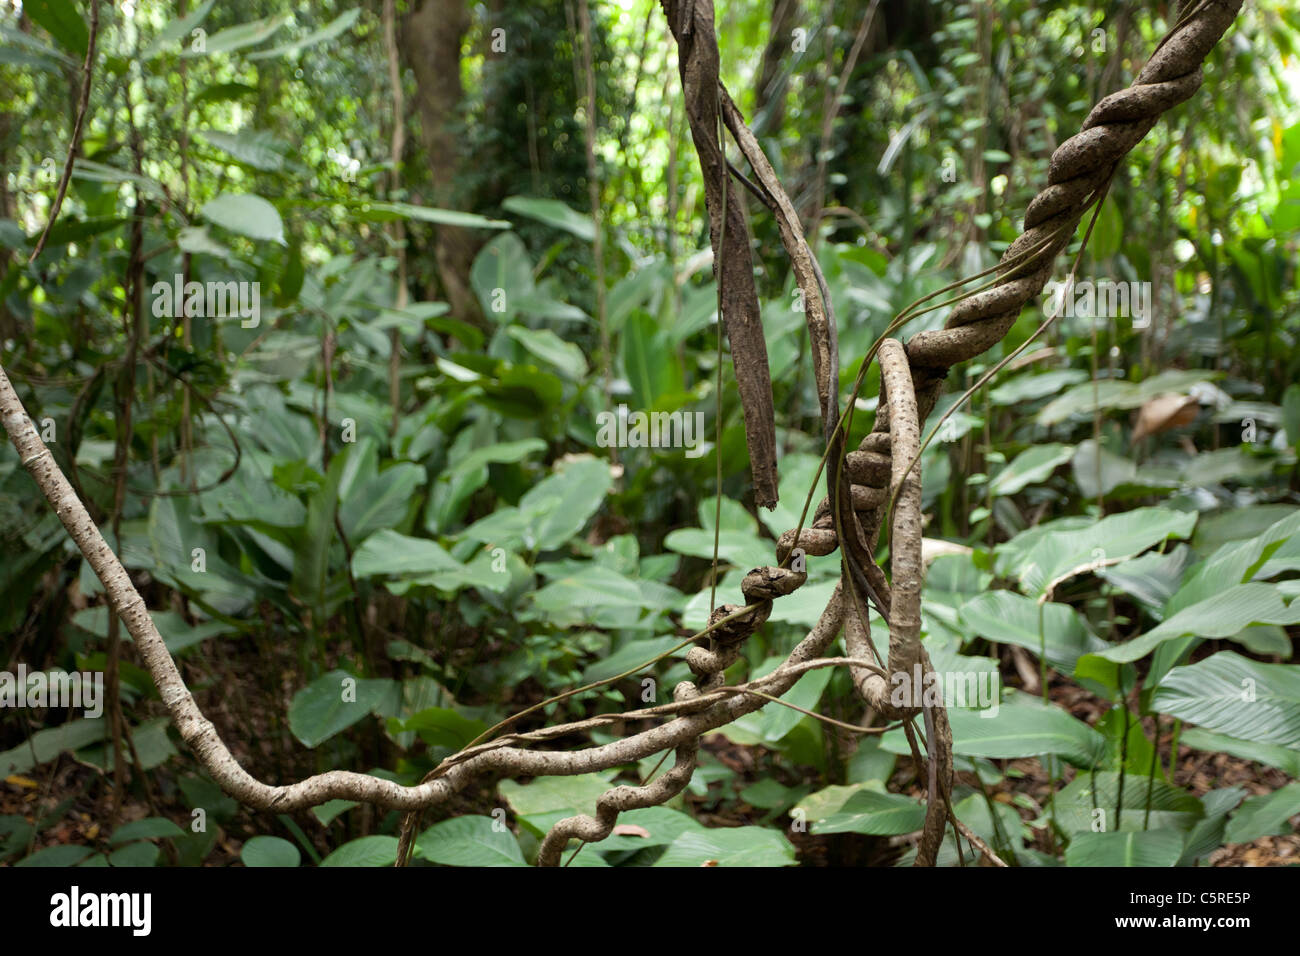 twisted vines and plant in tropical rainforest, kaeng krachan national park, thailand Stock Photo